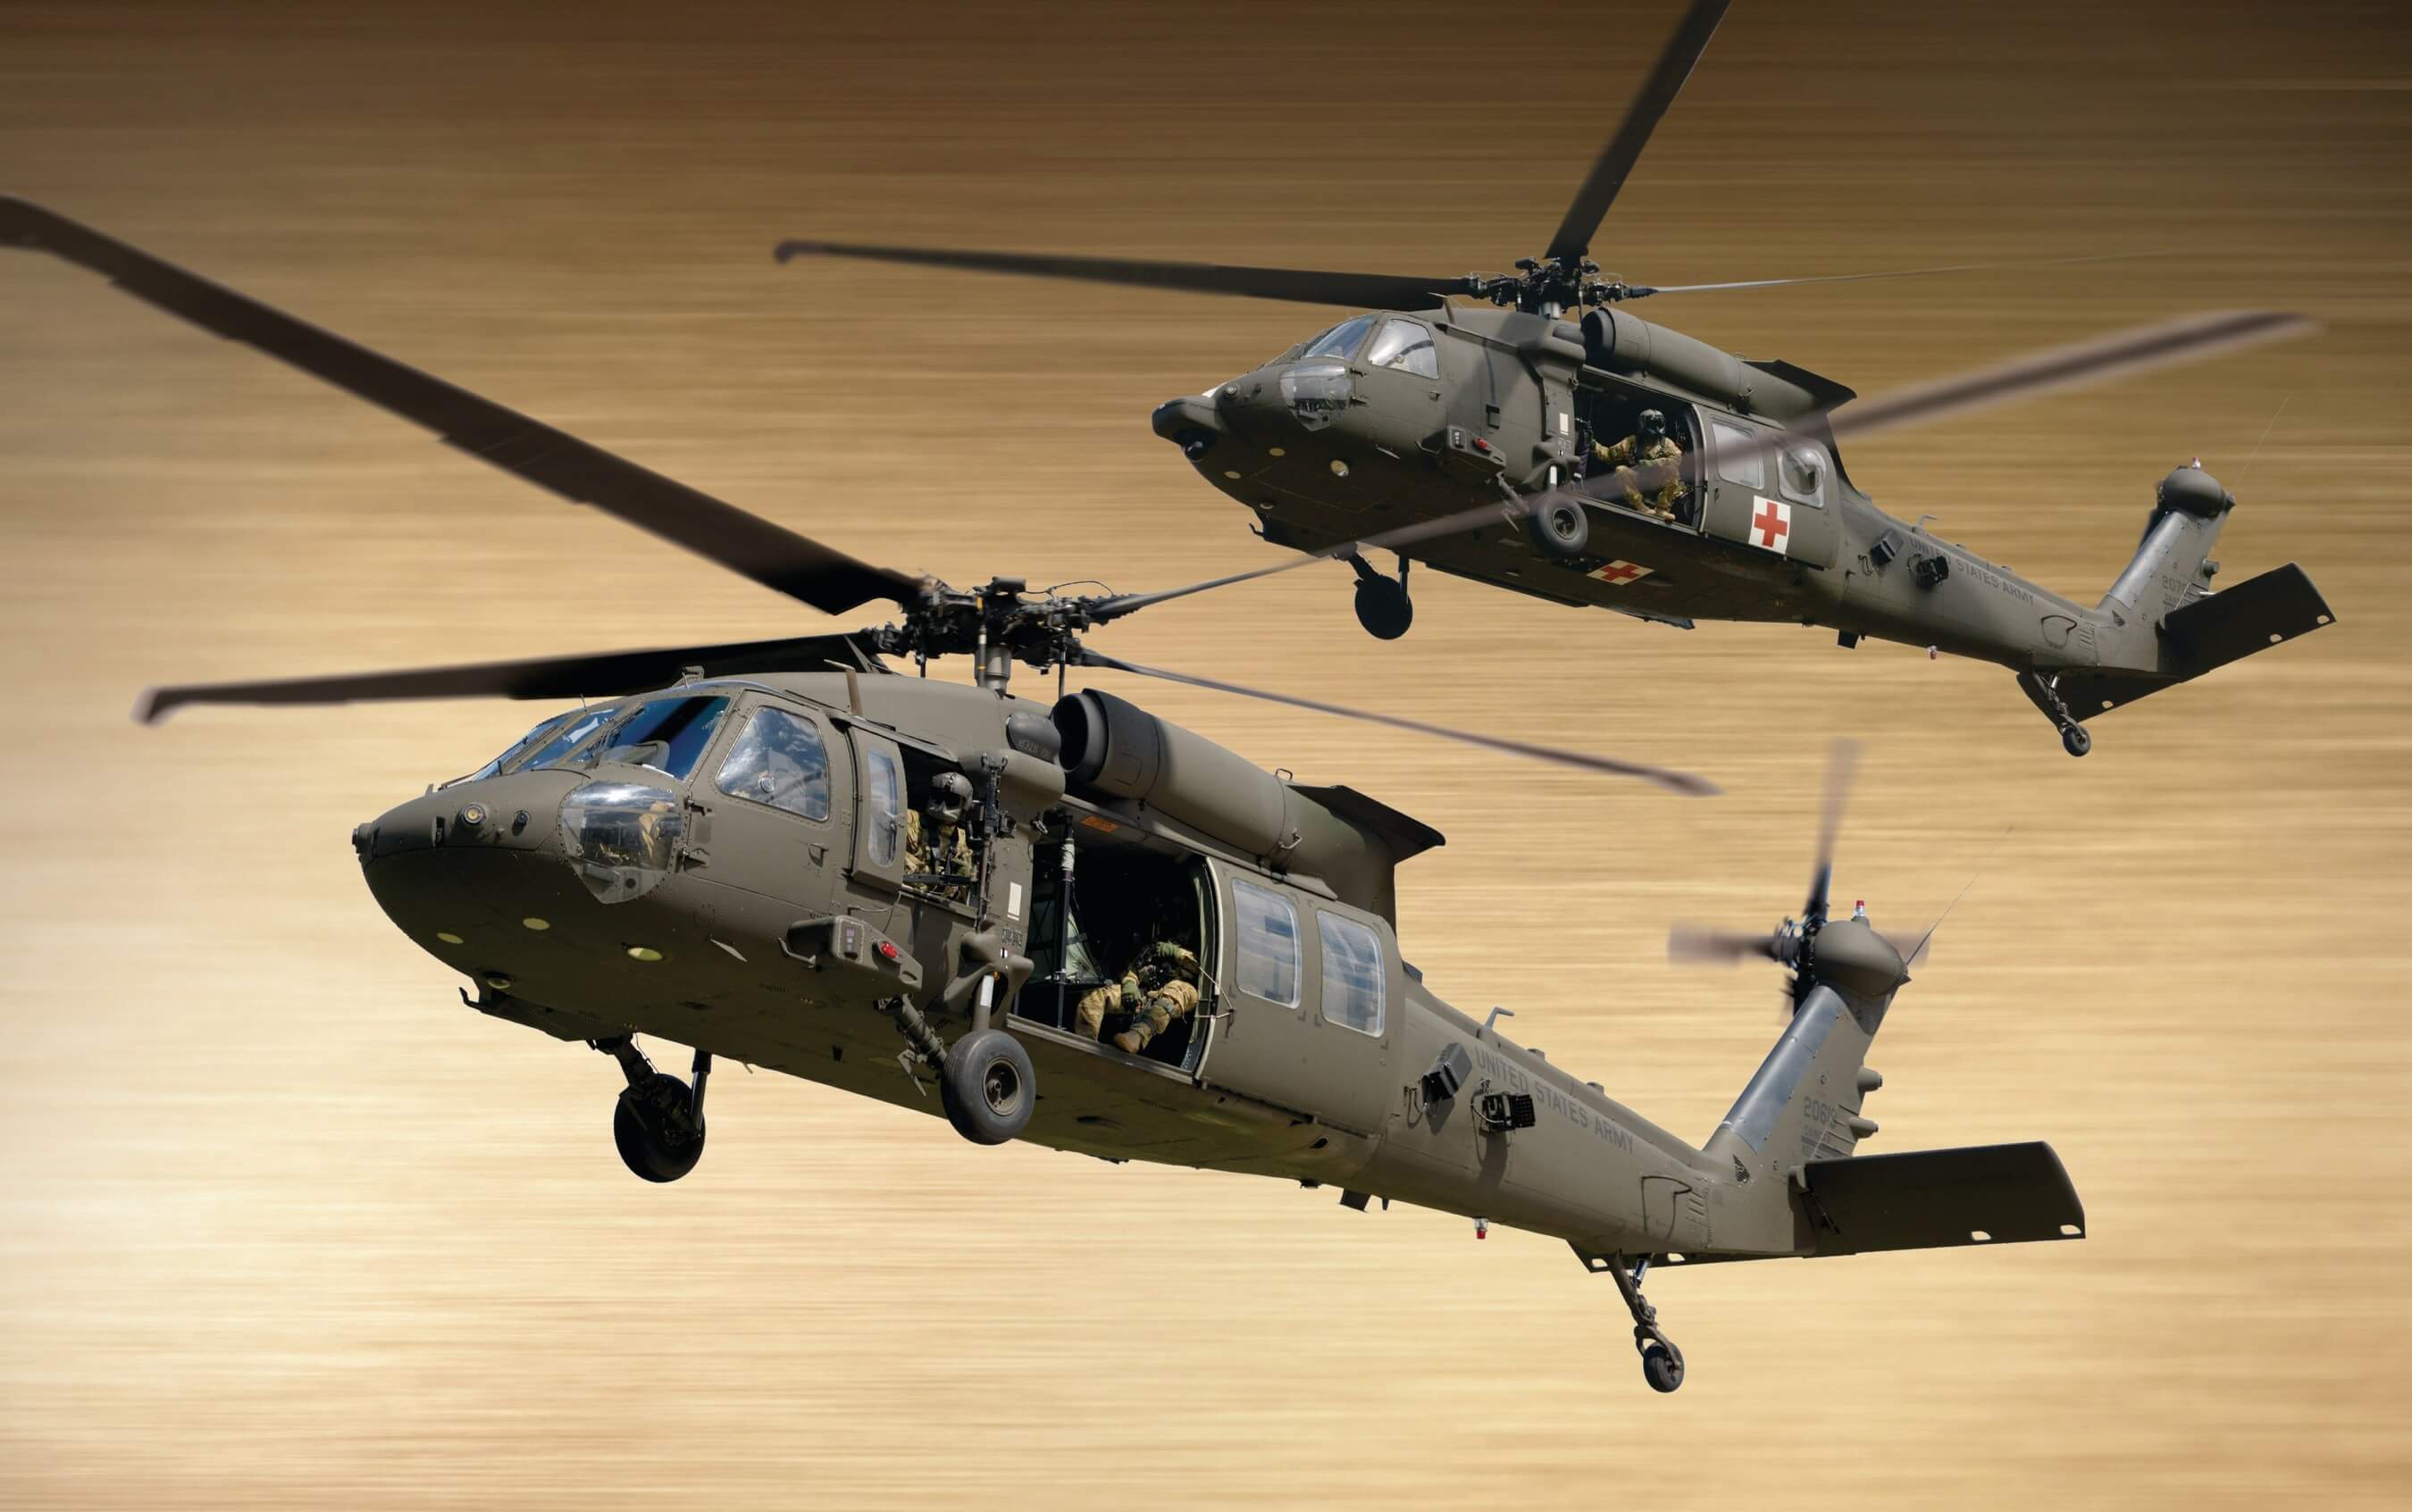 Under its latest multi-year contract, Sikorsky will deliver 257 UH-60M and HH-60M Black Hawk helicopters to the U.S. Army, with options for an additional 103 aircraft. Lockheed Martin Photo